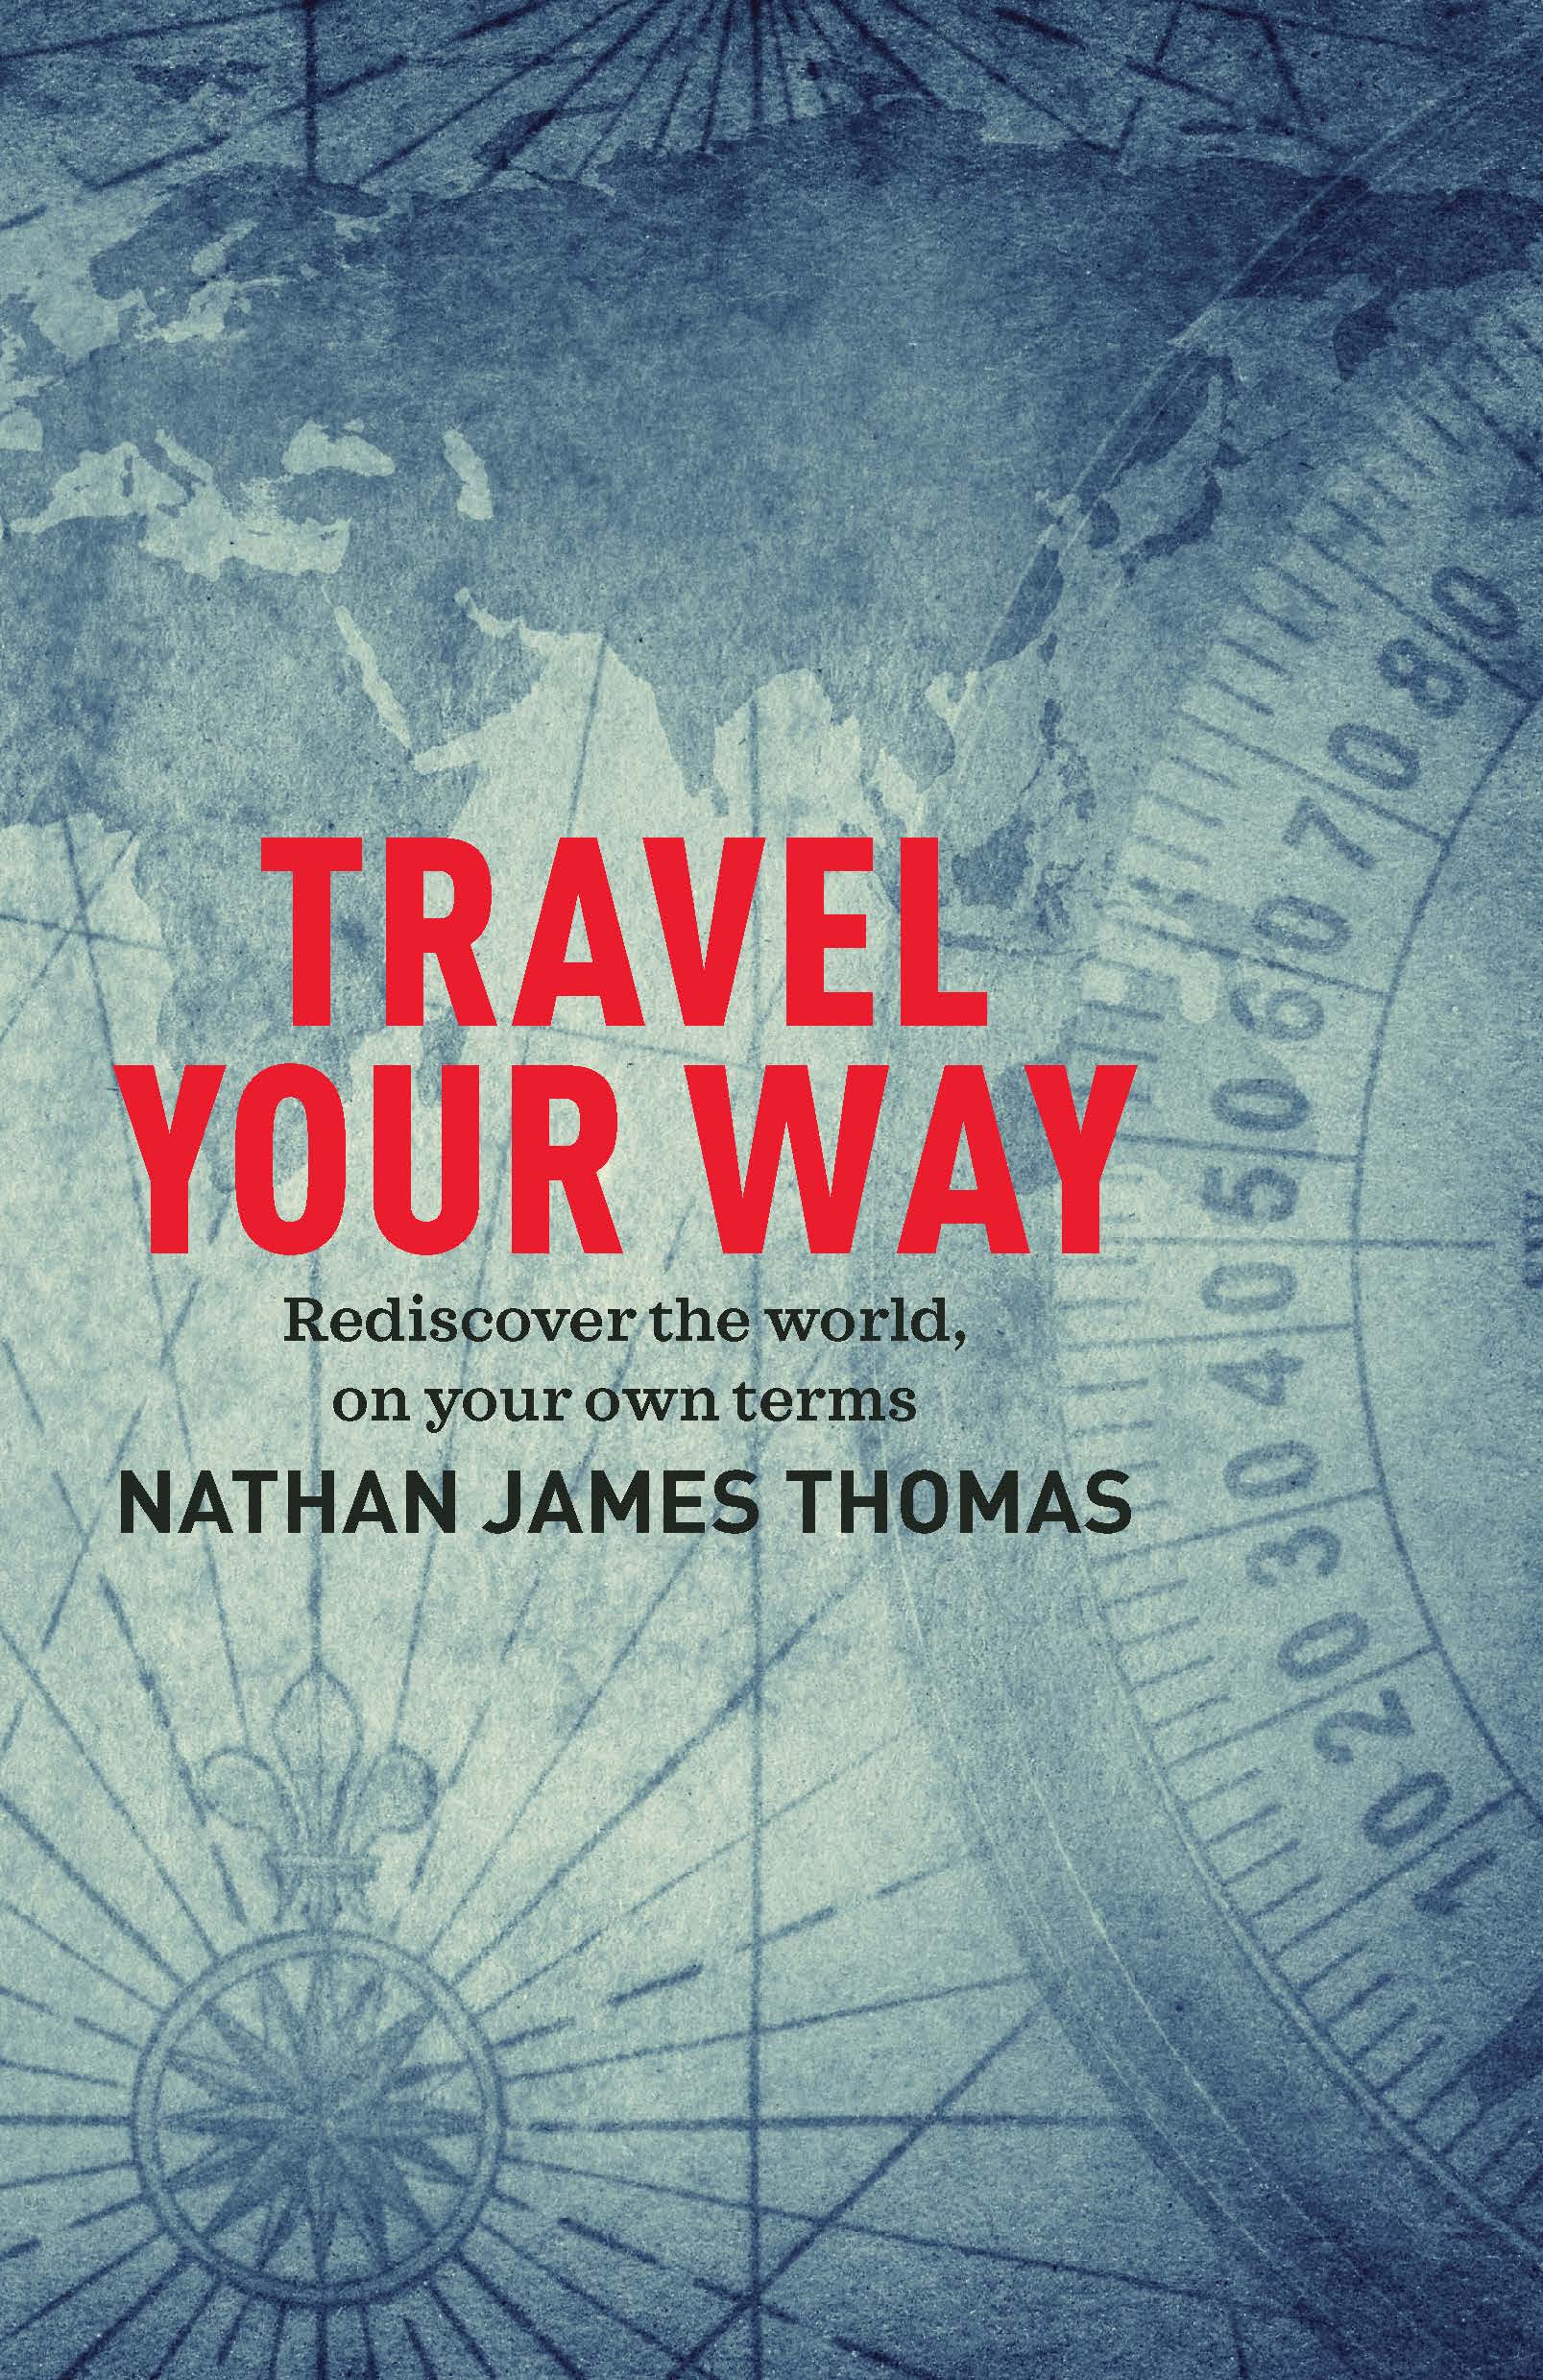 travel your way by nathan james thomas is a book about rediscovering the world on your own terms